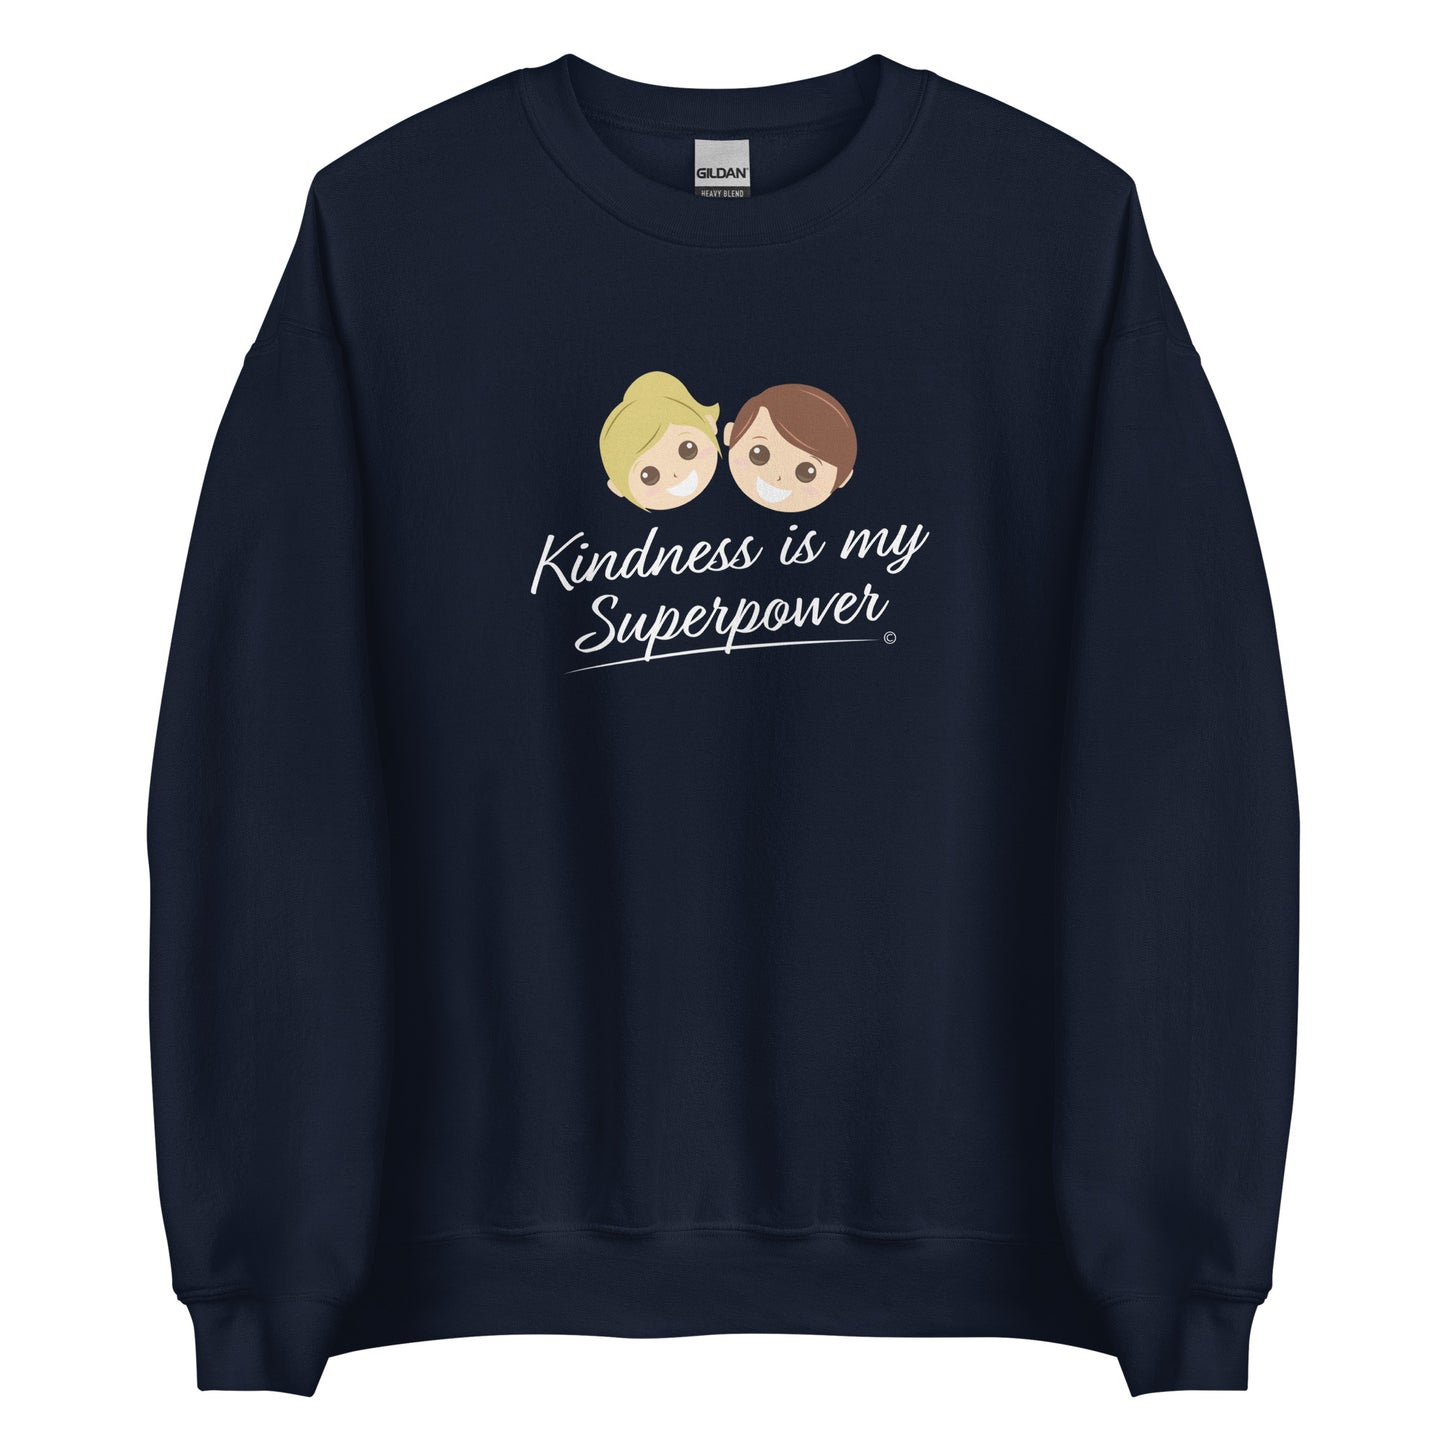 A cozy unisex sweatshirt in navy featuring the uplifting quote 'Kindness is my Superpower' in bold lettering.